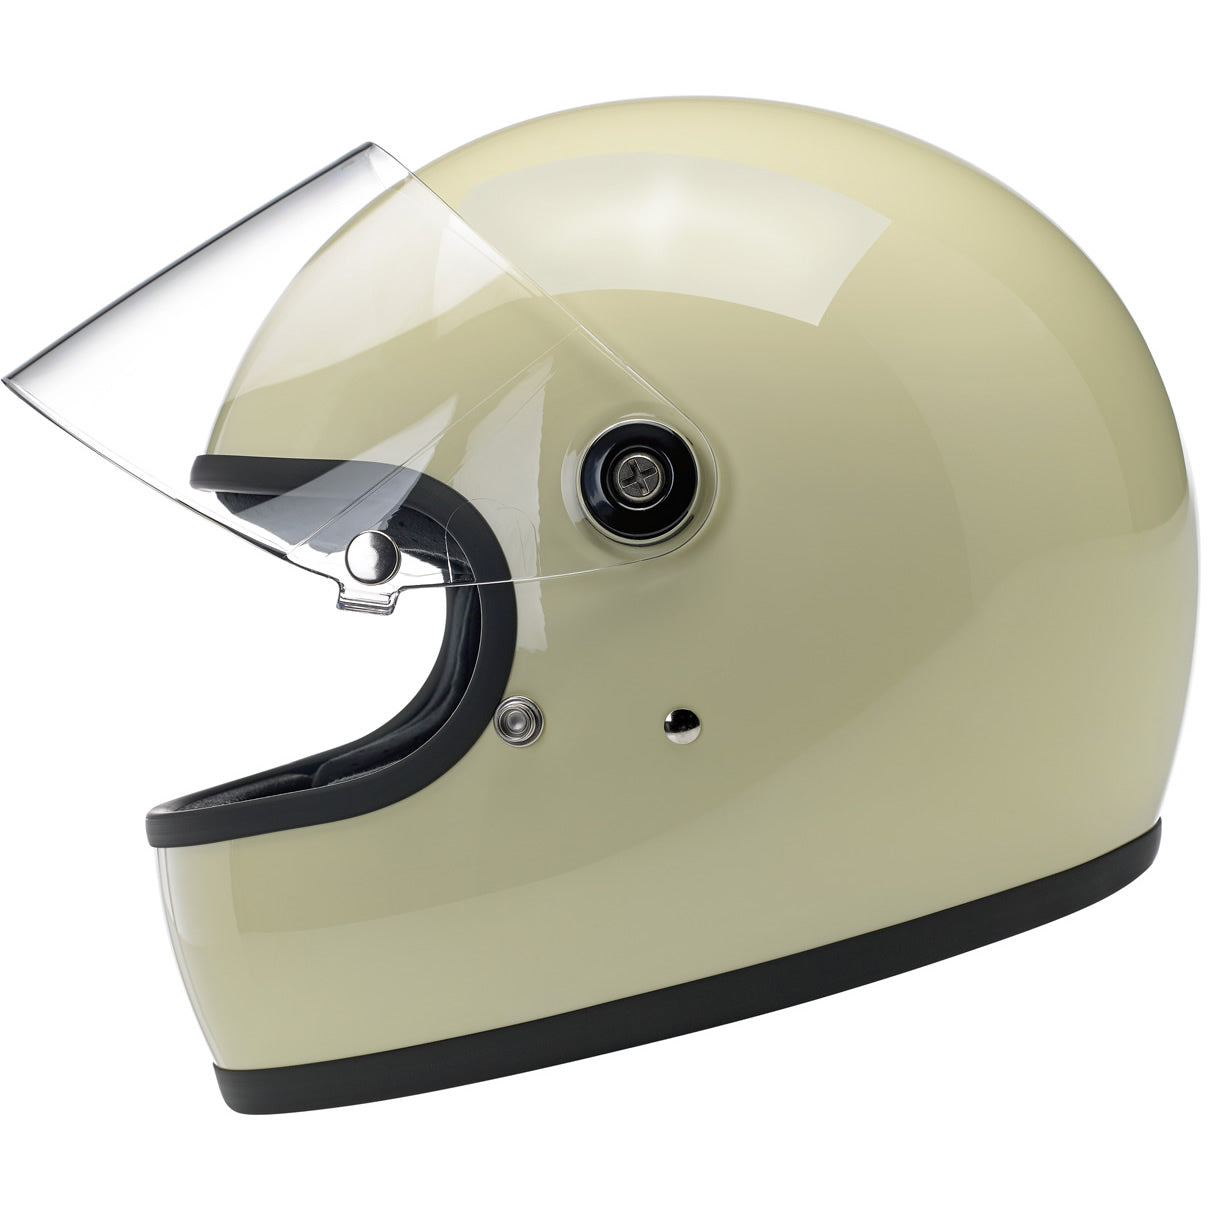 CLOSEOUT Gringo S ECE R22.05 Helmet - Gloss Vintage White X-SMALL ONLY